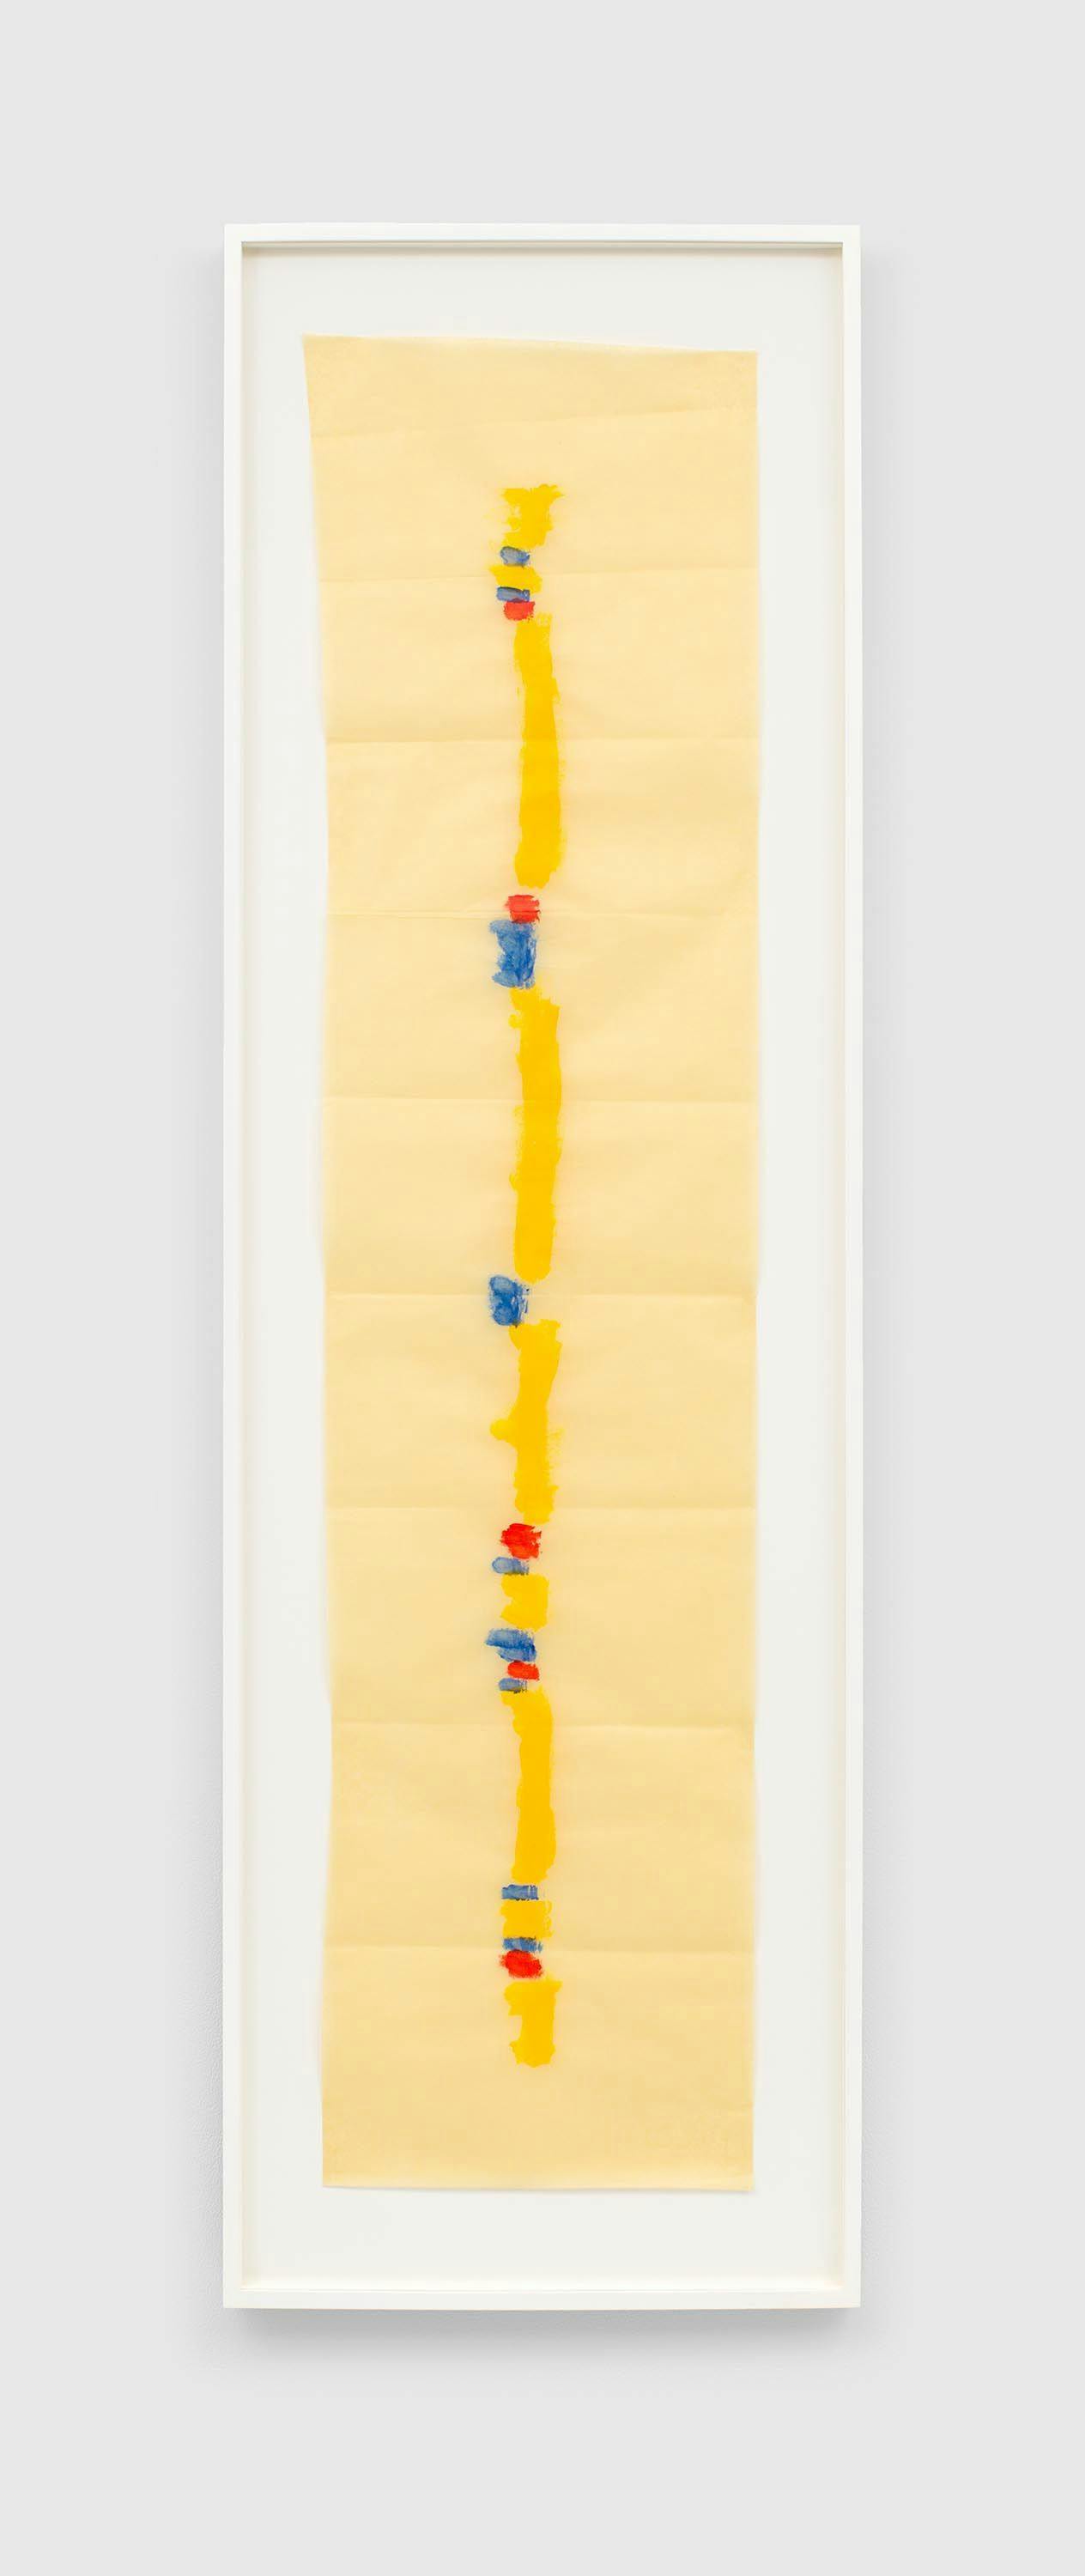 An acrylic paint on paper by Fred Sandback, called Untitled, circa 1995.